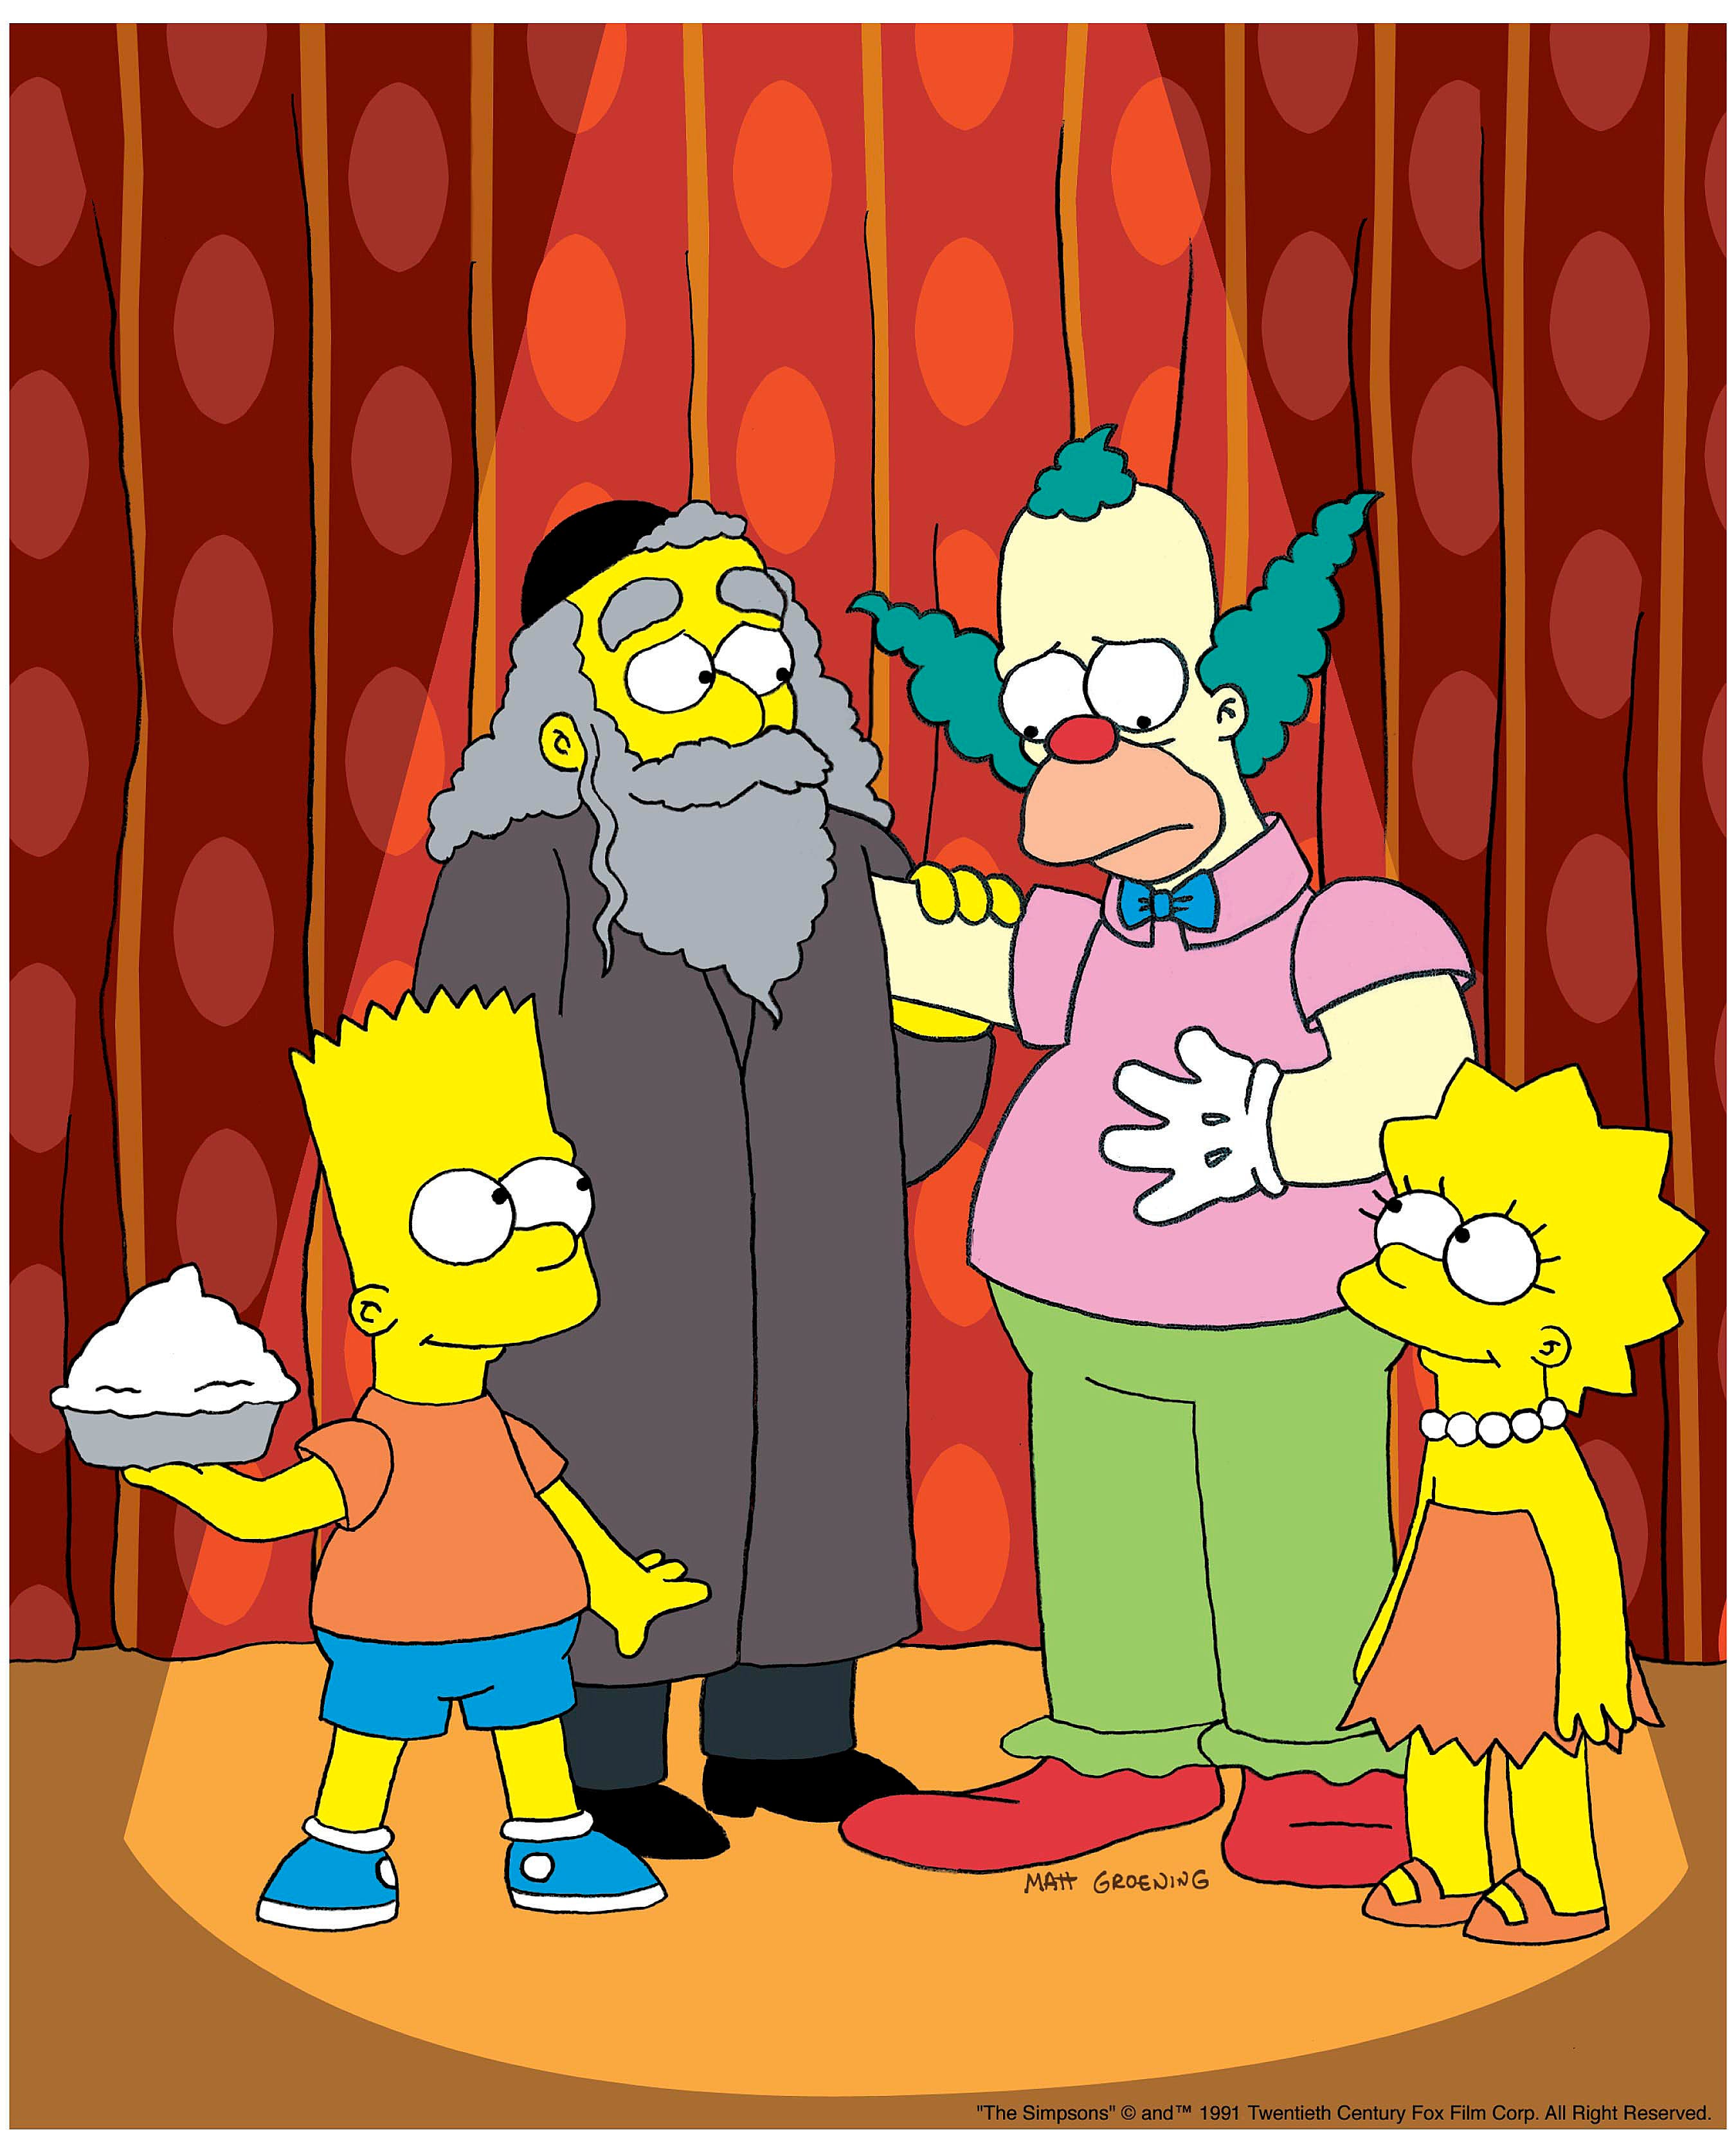 The Simpsons Mourns Beloved Characters Death 